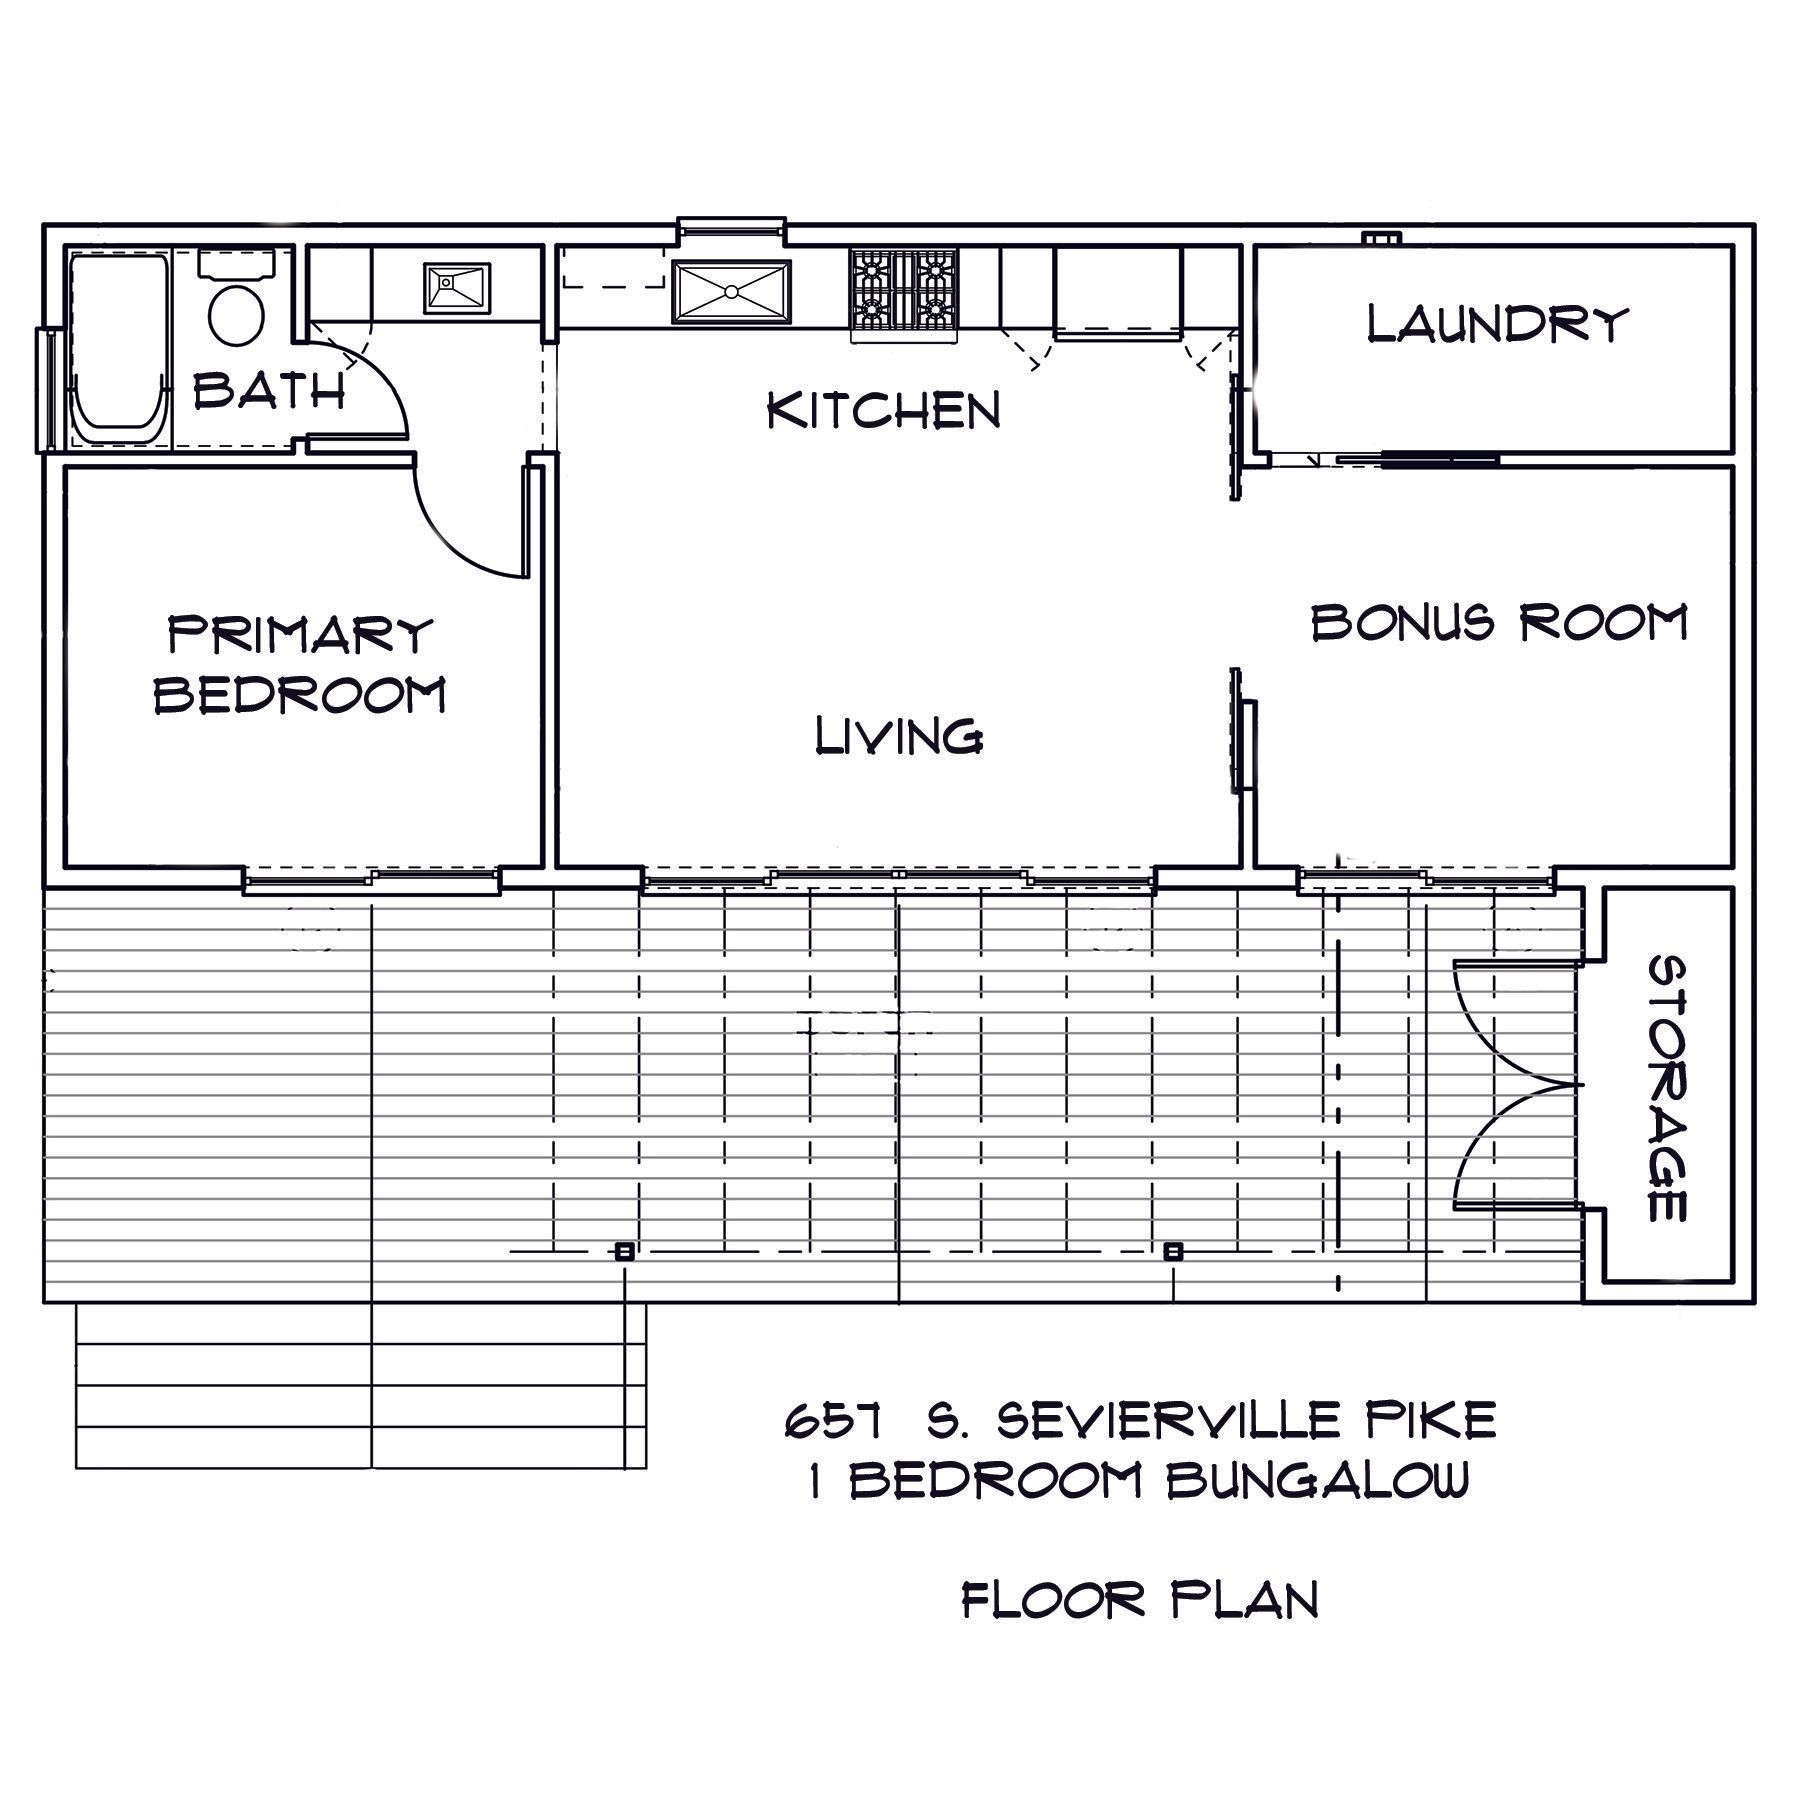 657 S Old Sevierville Pike floor plan